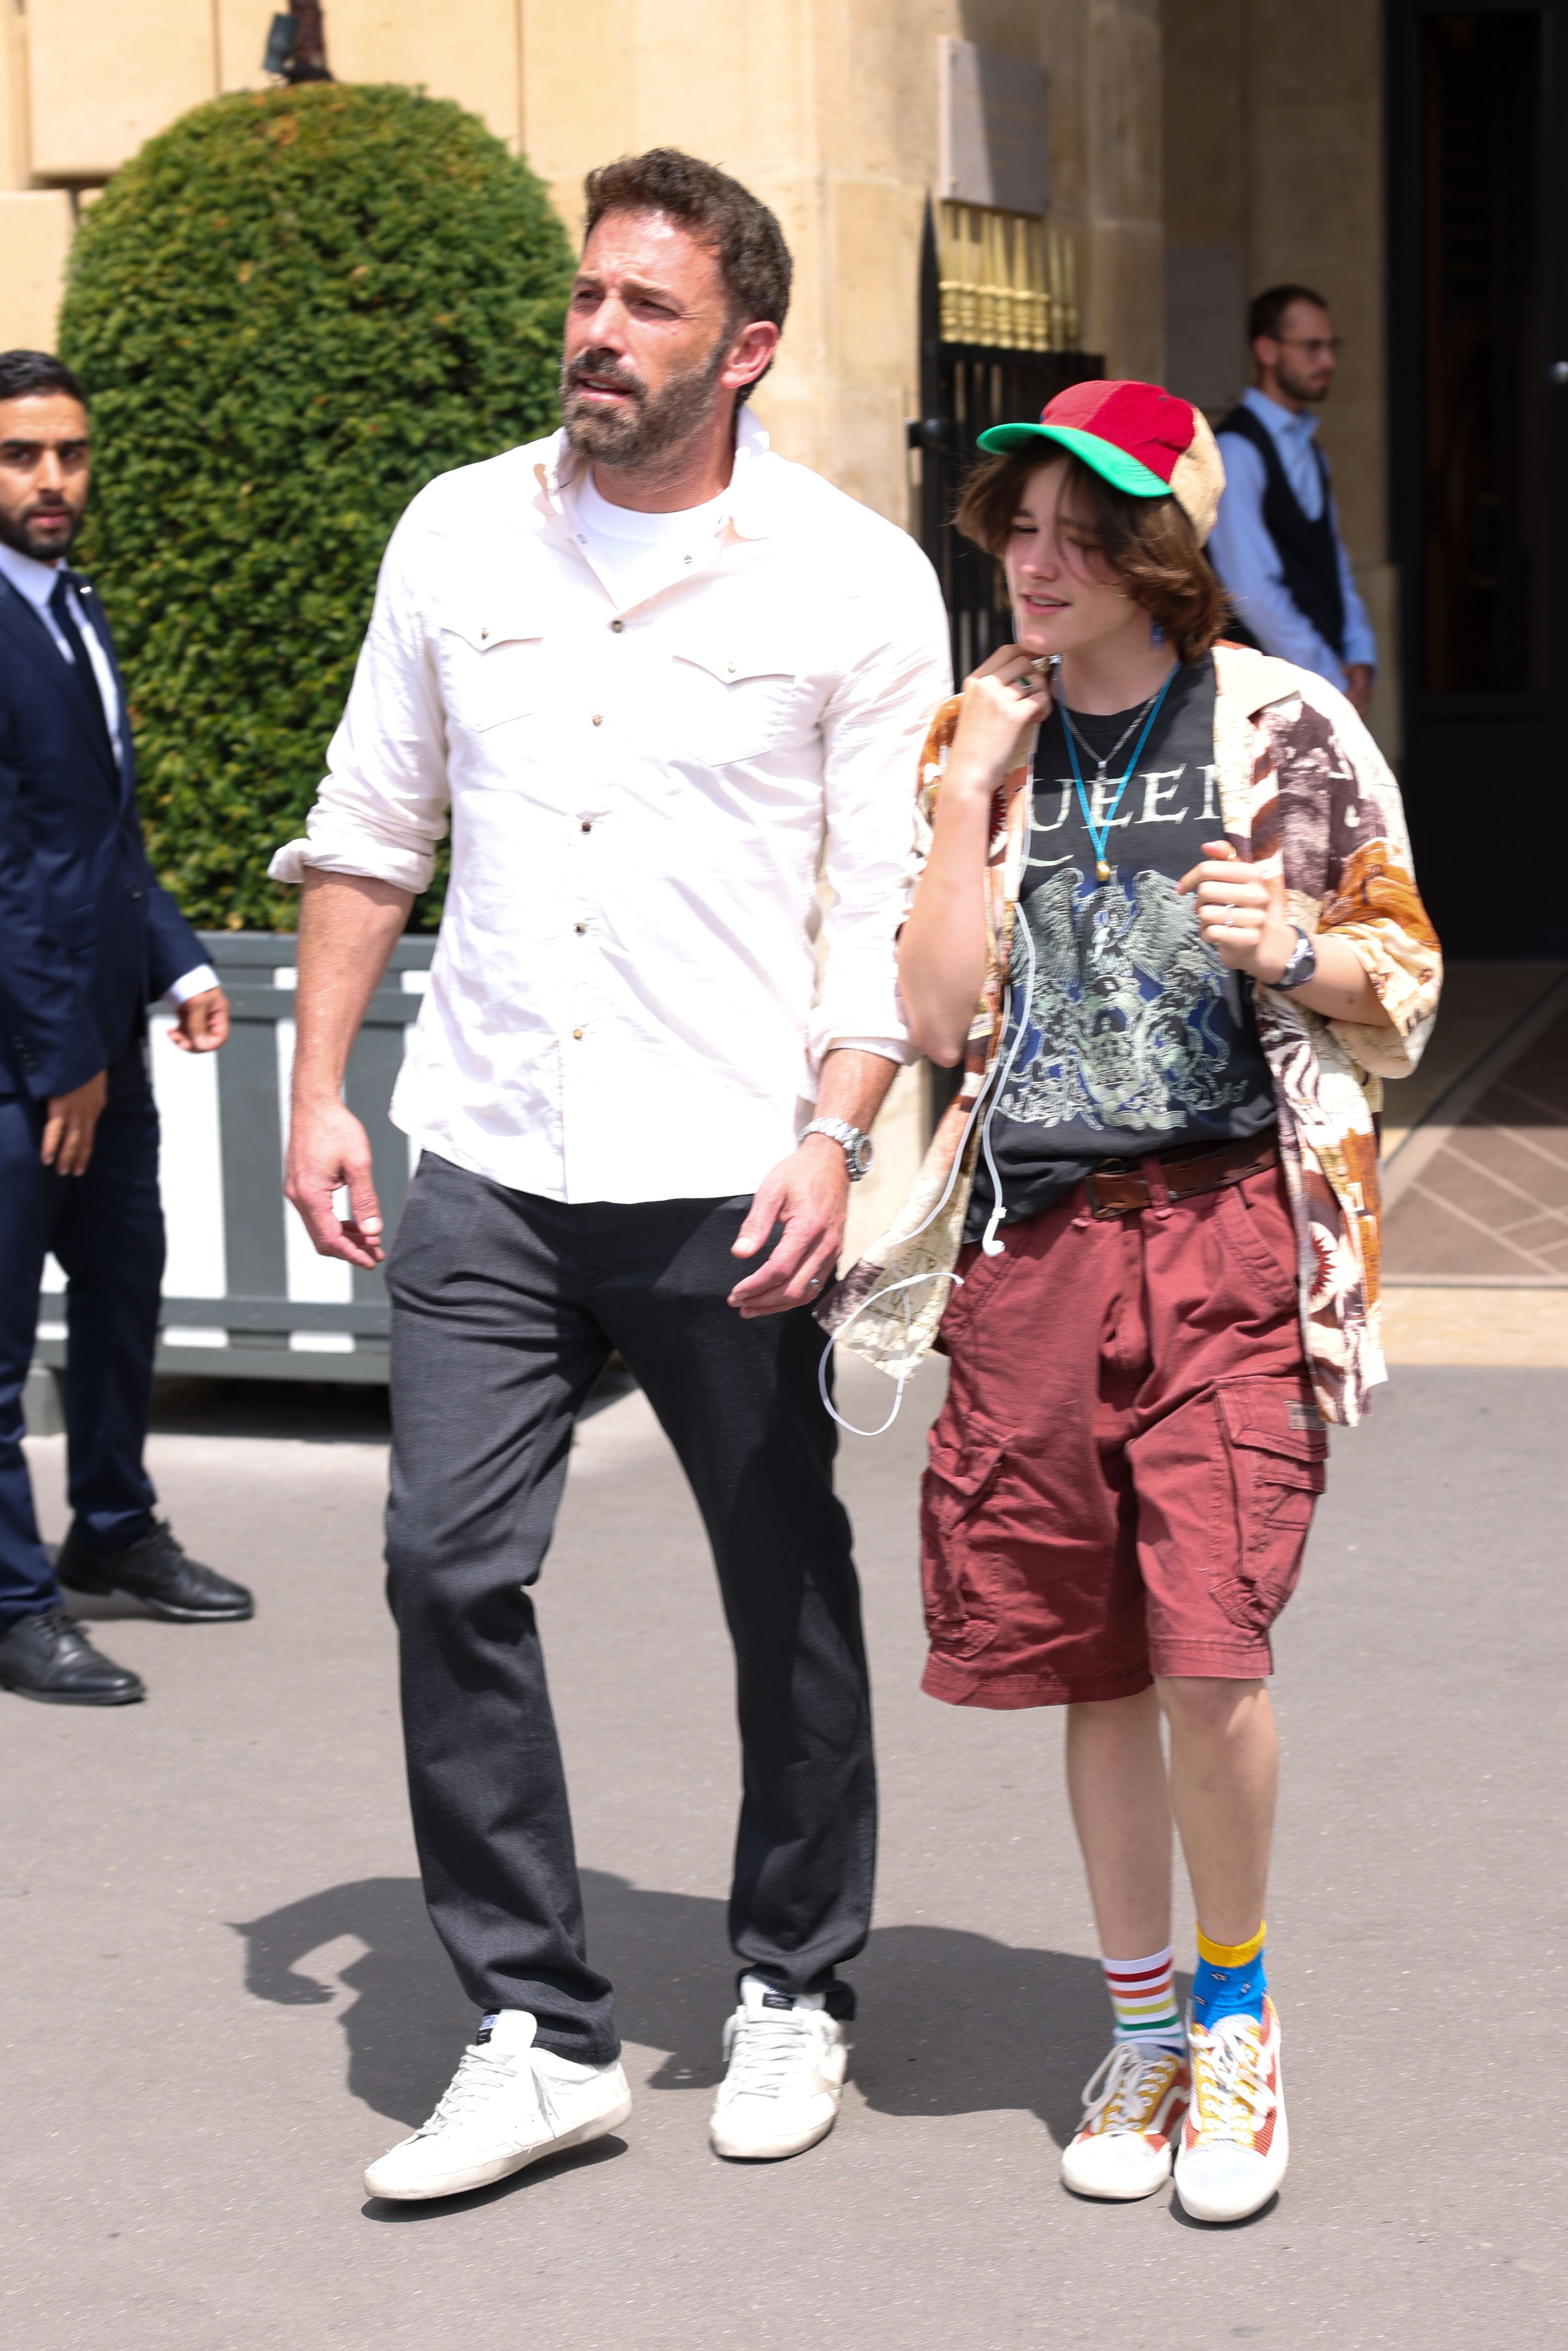 Ben Affleck and Seraphina Affleck pictured leaving their hotel on July 25, 2022 in Paris, France. | Source: Getty Images